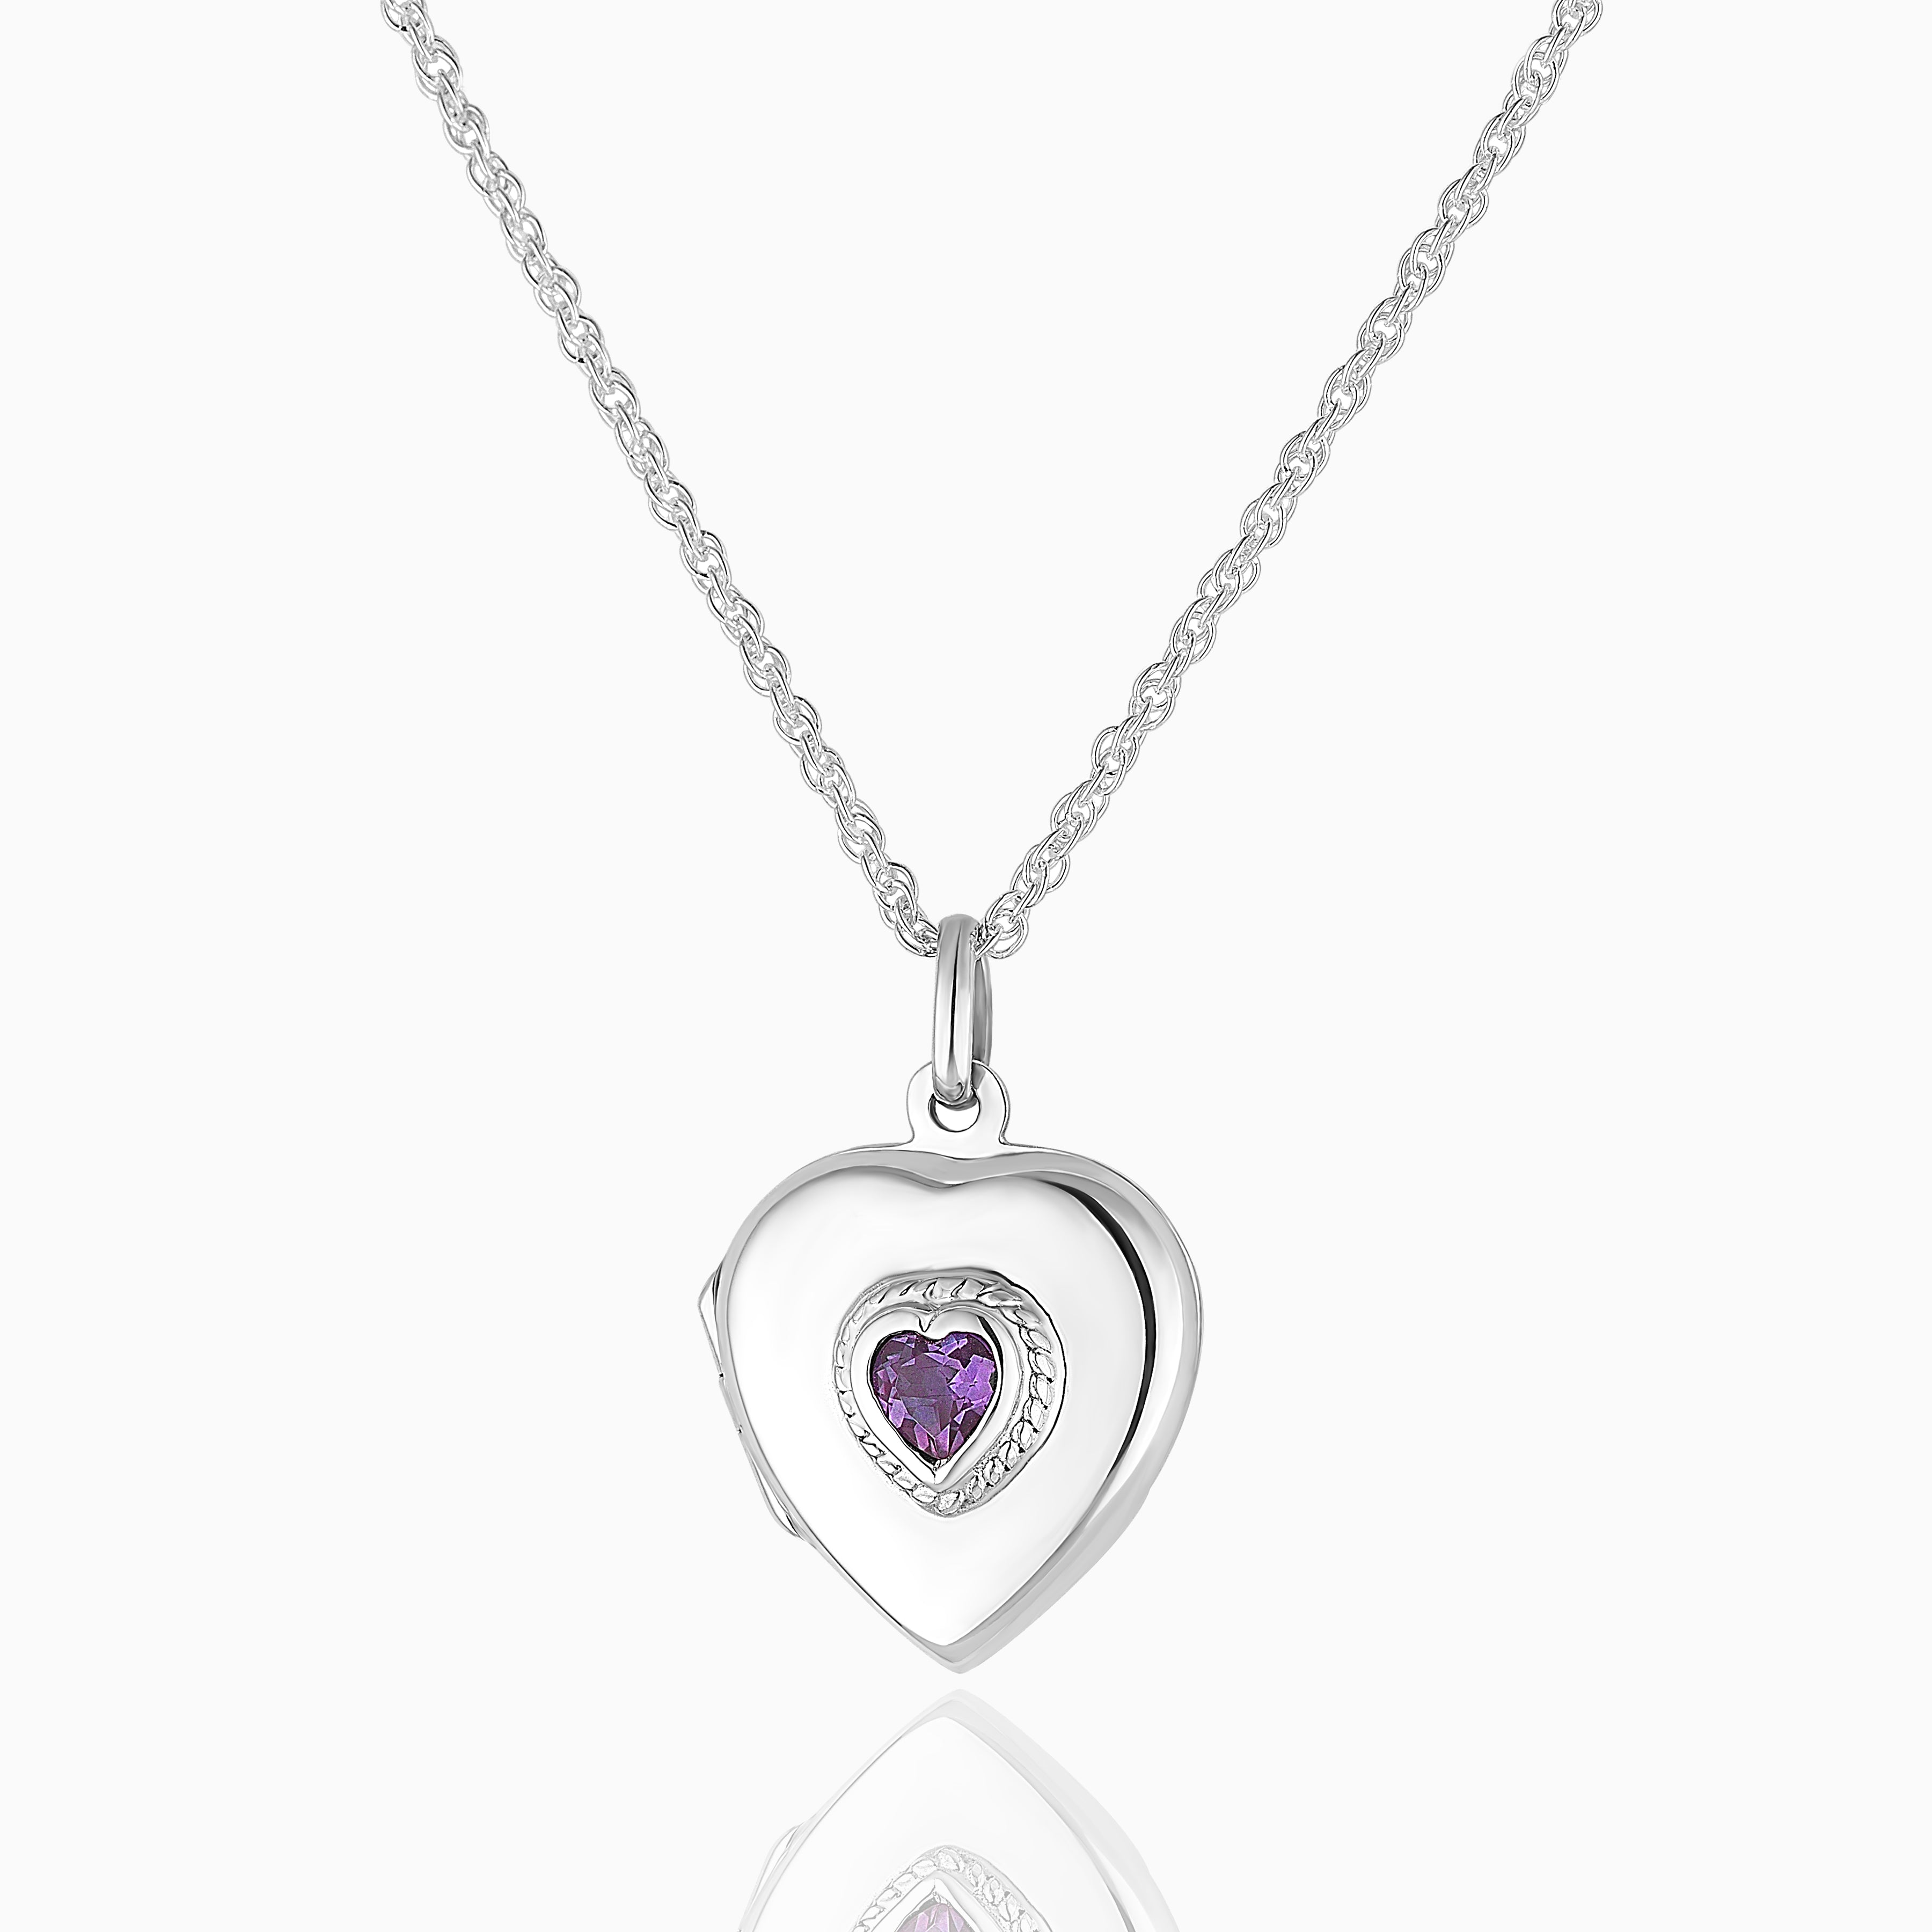 sterling silver heart shaped locket set with a purple amethyst, on a sterling silver rope chain